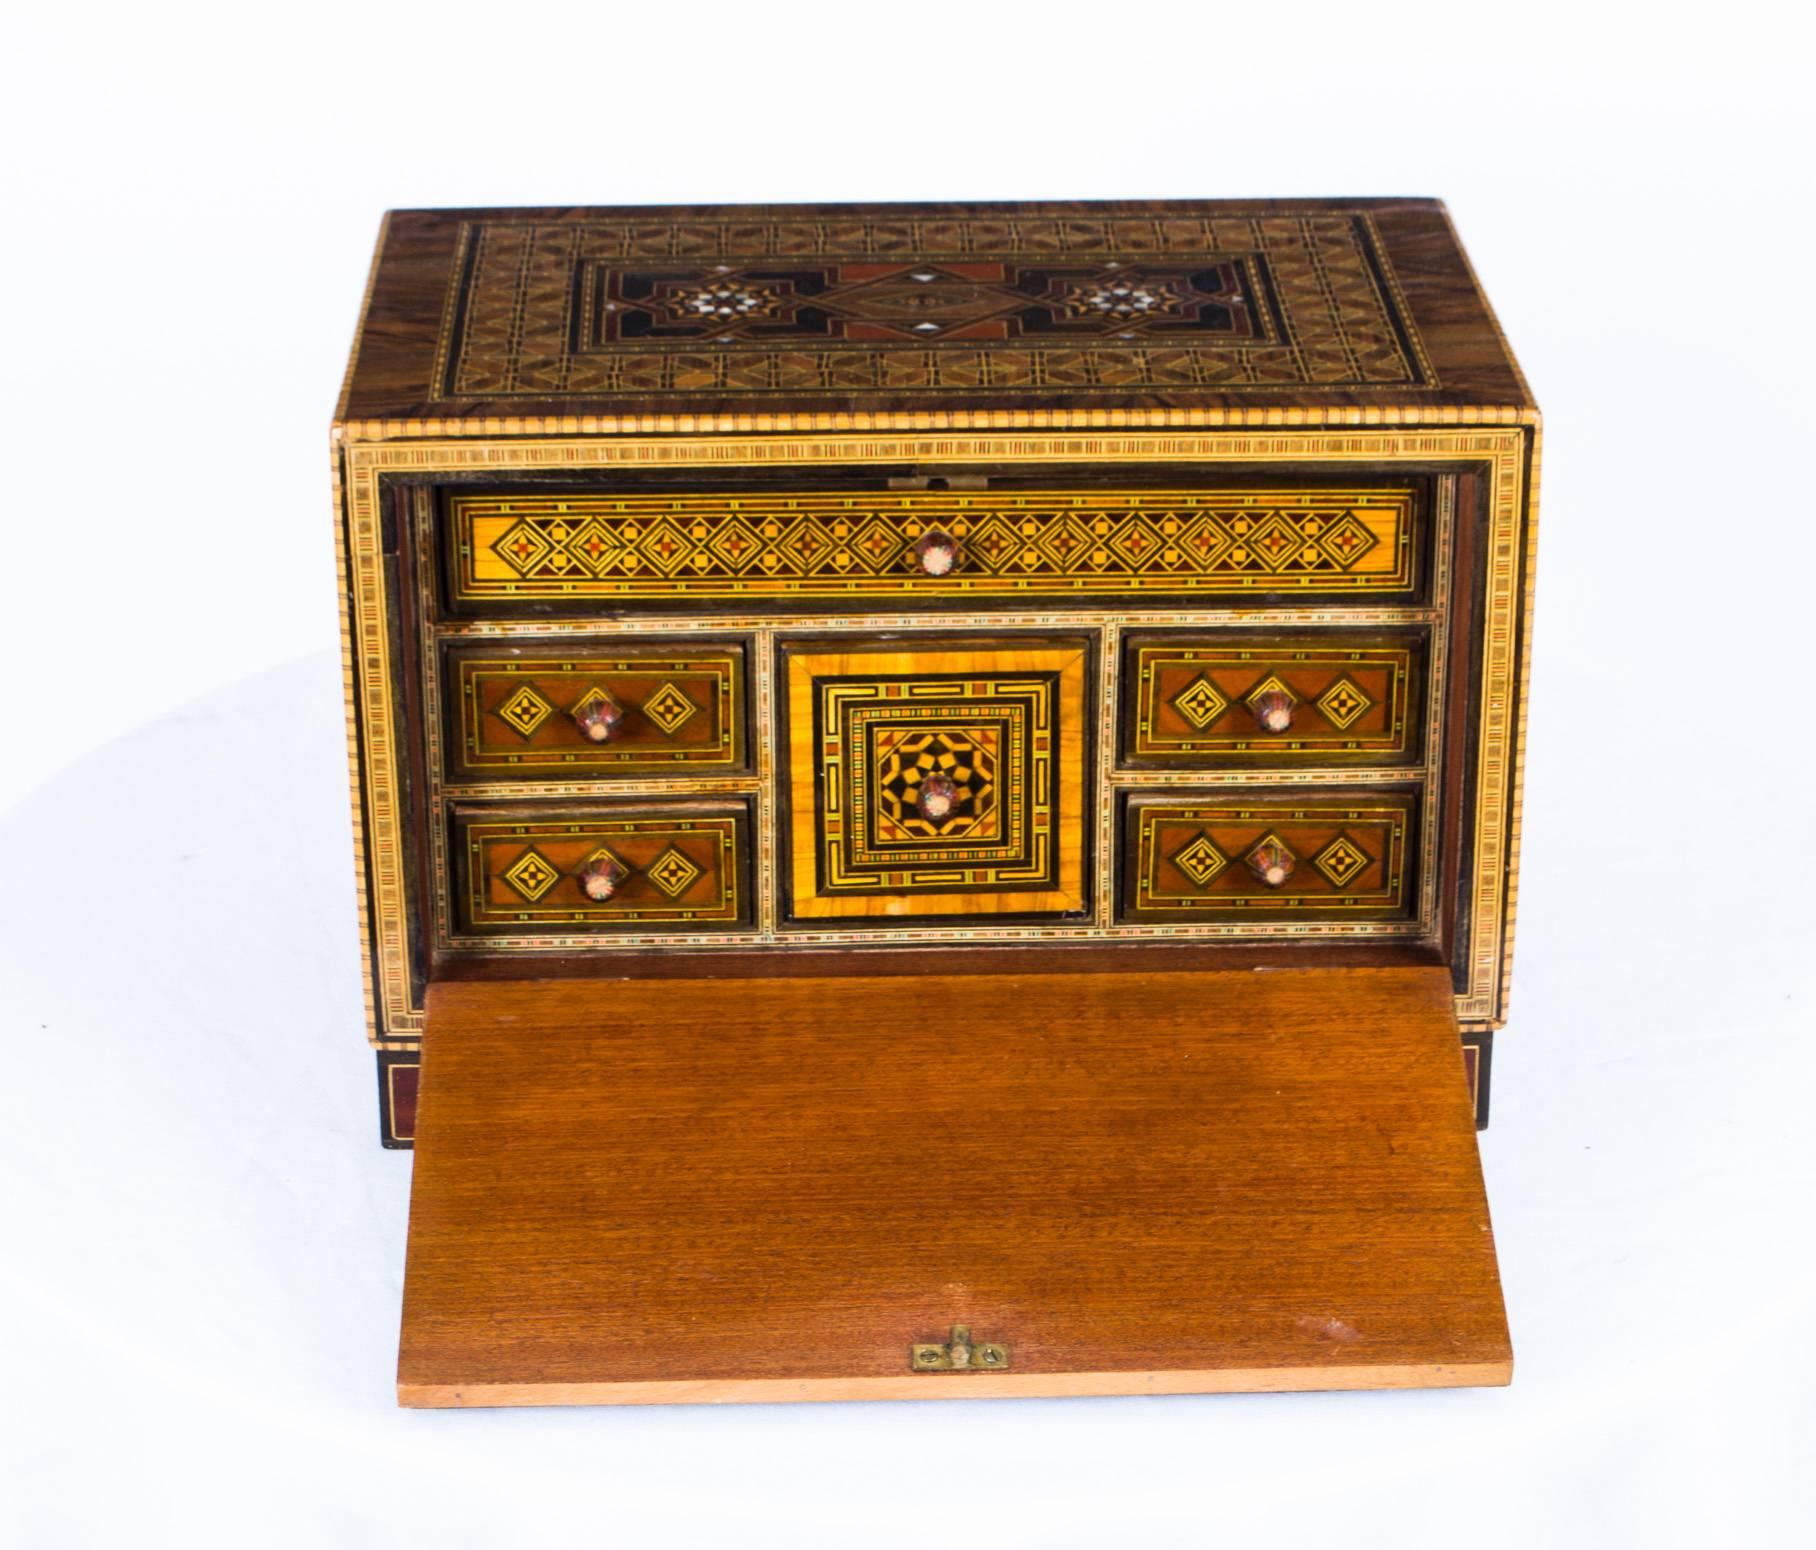 Syrian Antique Inlaid Damascus Islamic Table Cabinet